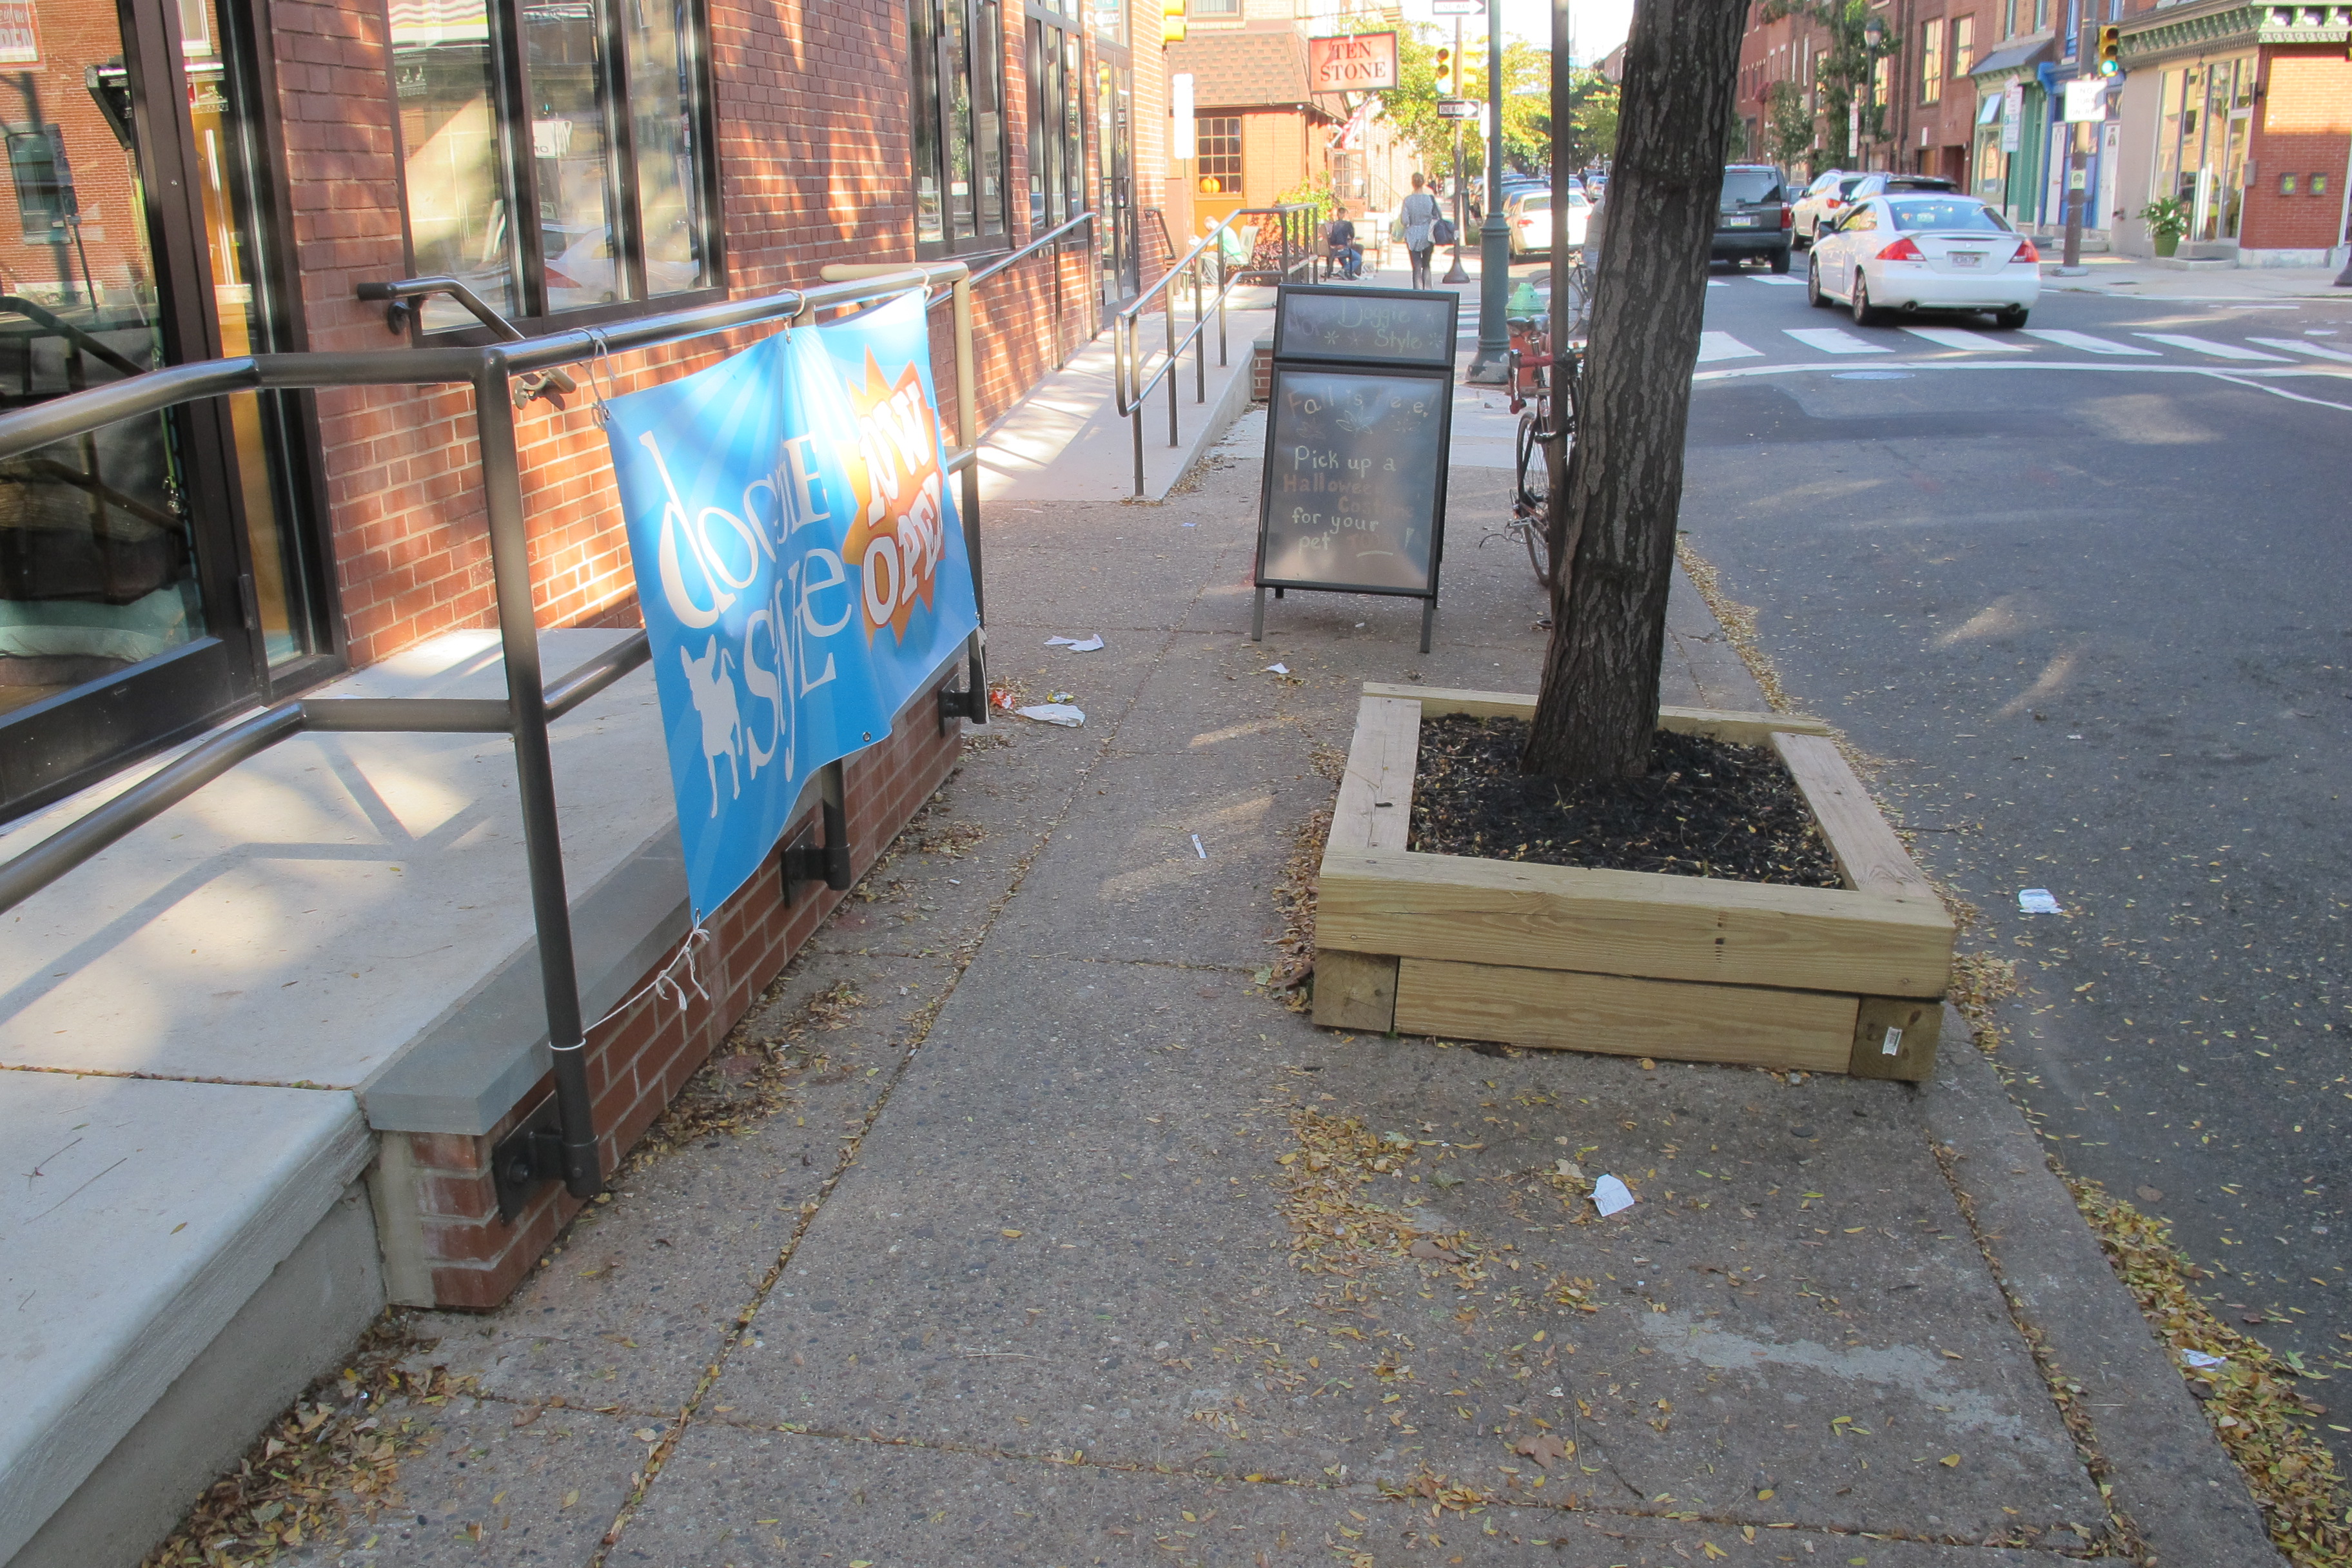 Between the new ramp and the street tree, the sidewalk becomes about 3 feet wide.